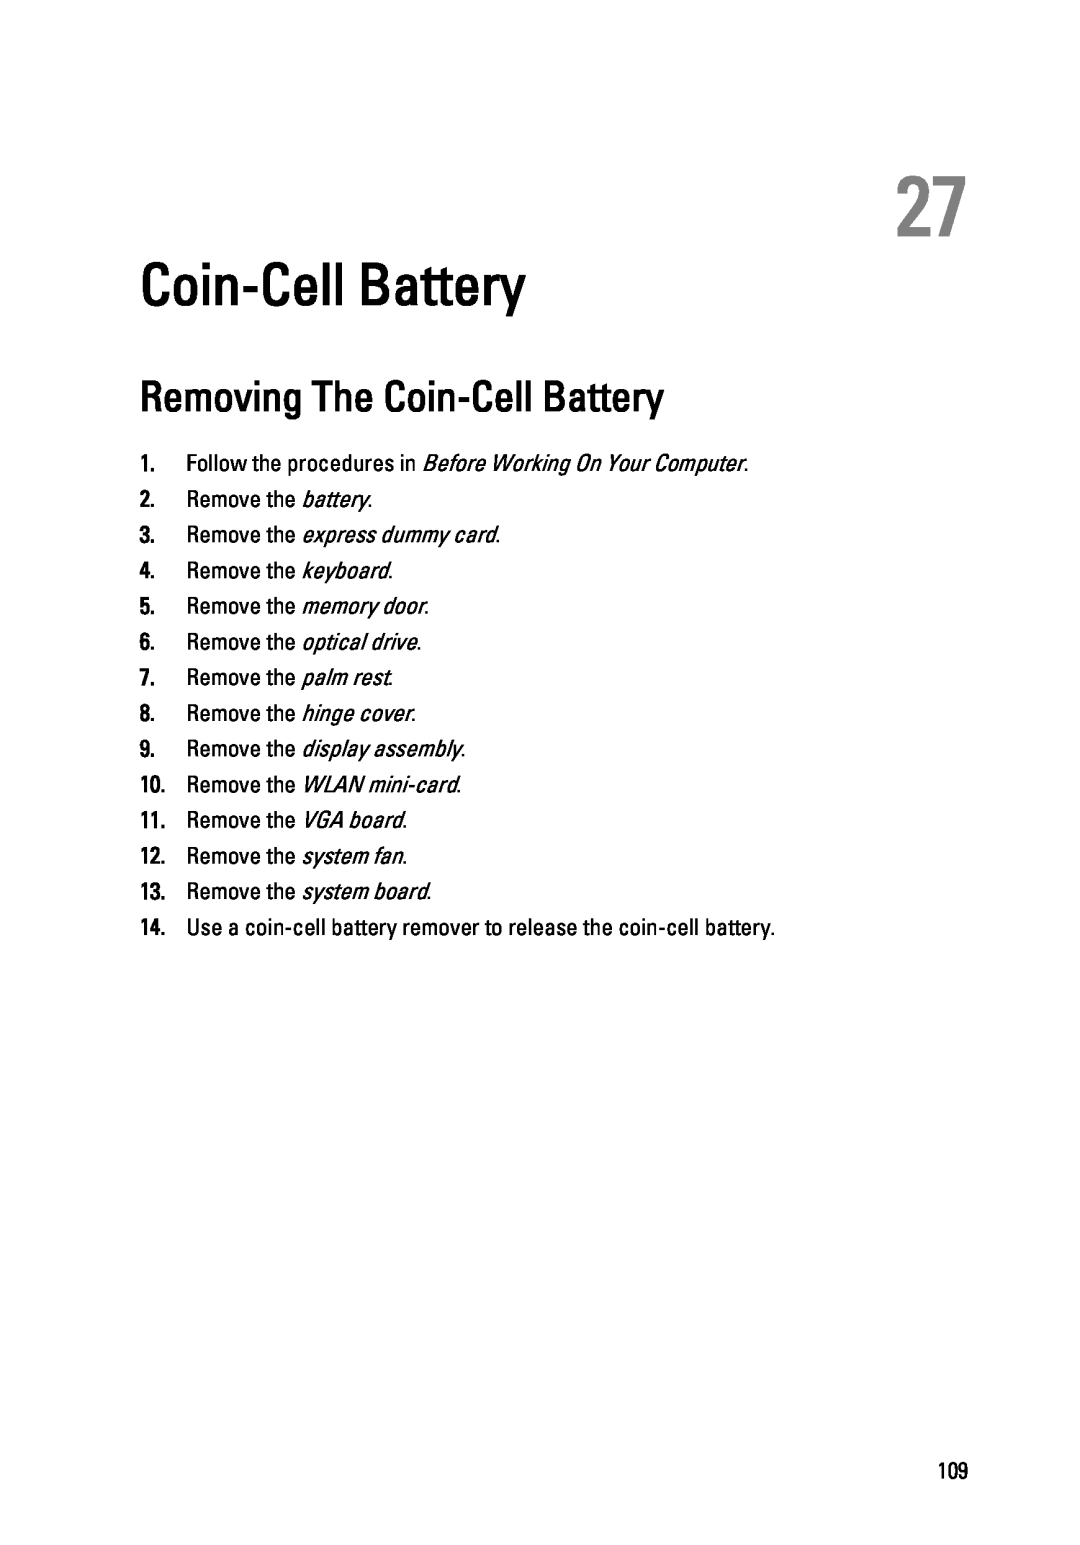 Dell 3450 owner manual Removing The Coin-Cell Battery, Follow the procedures in Before Working On Your Computer 